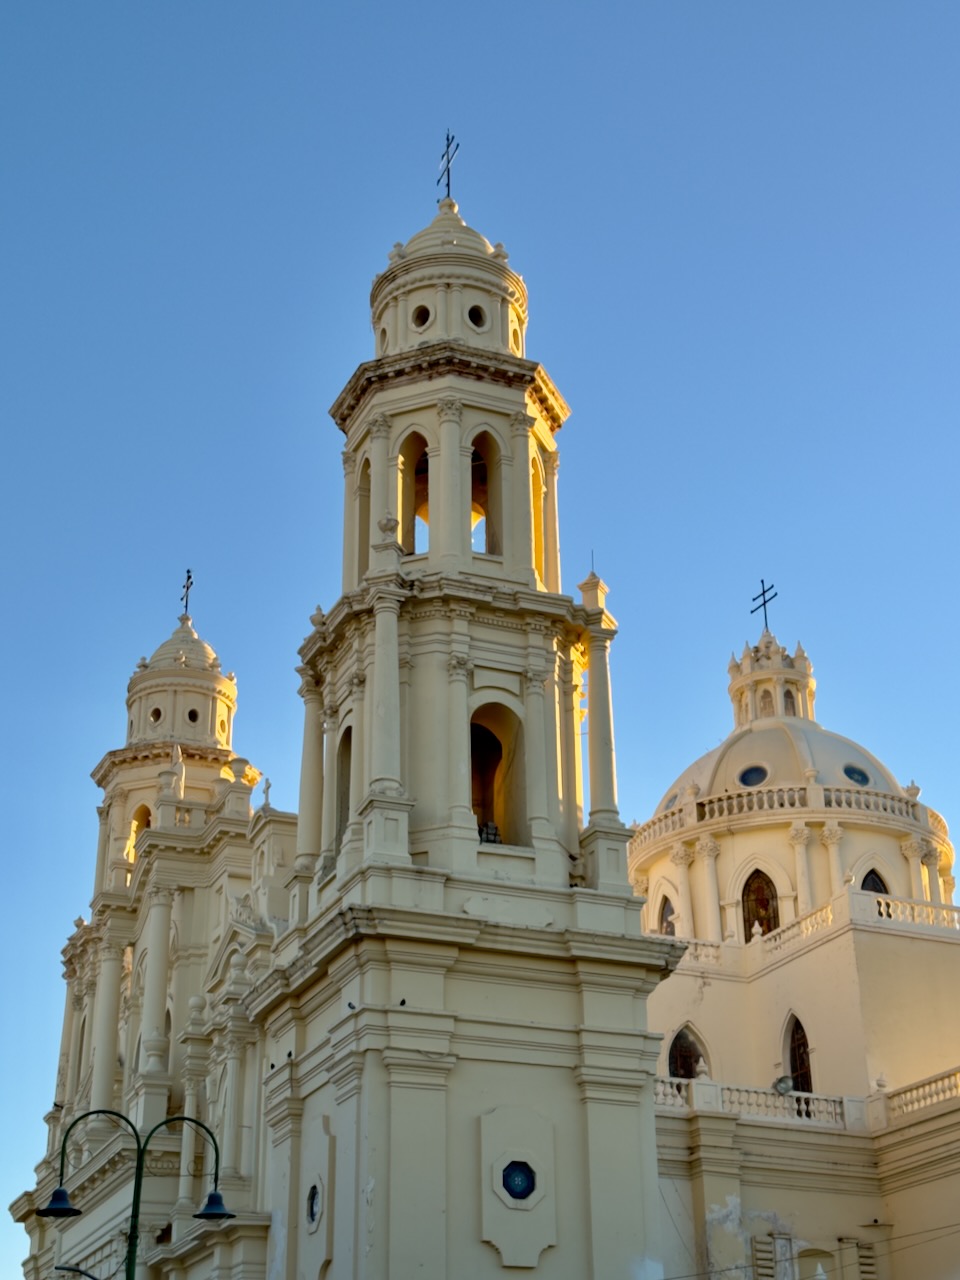 Towers of the main cathedral in Hermosillo, Sonora, Mexico.